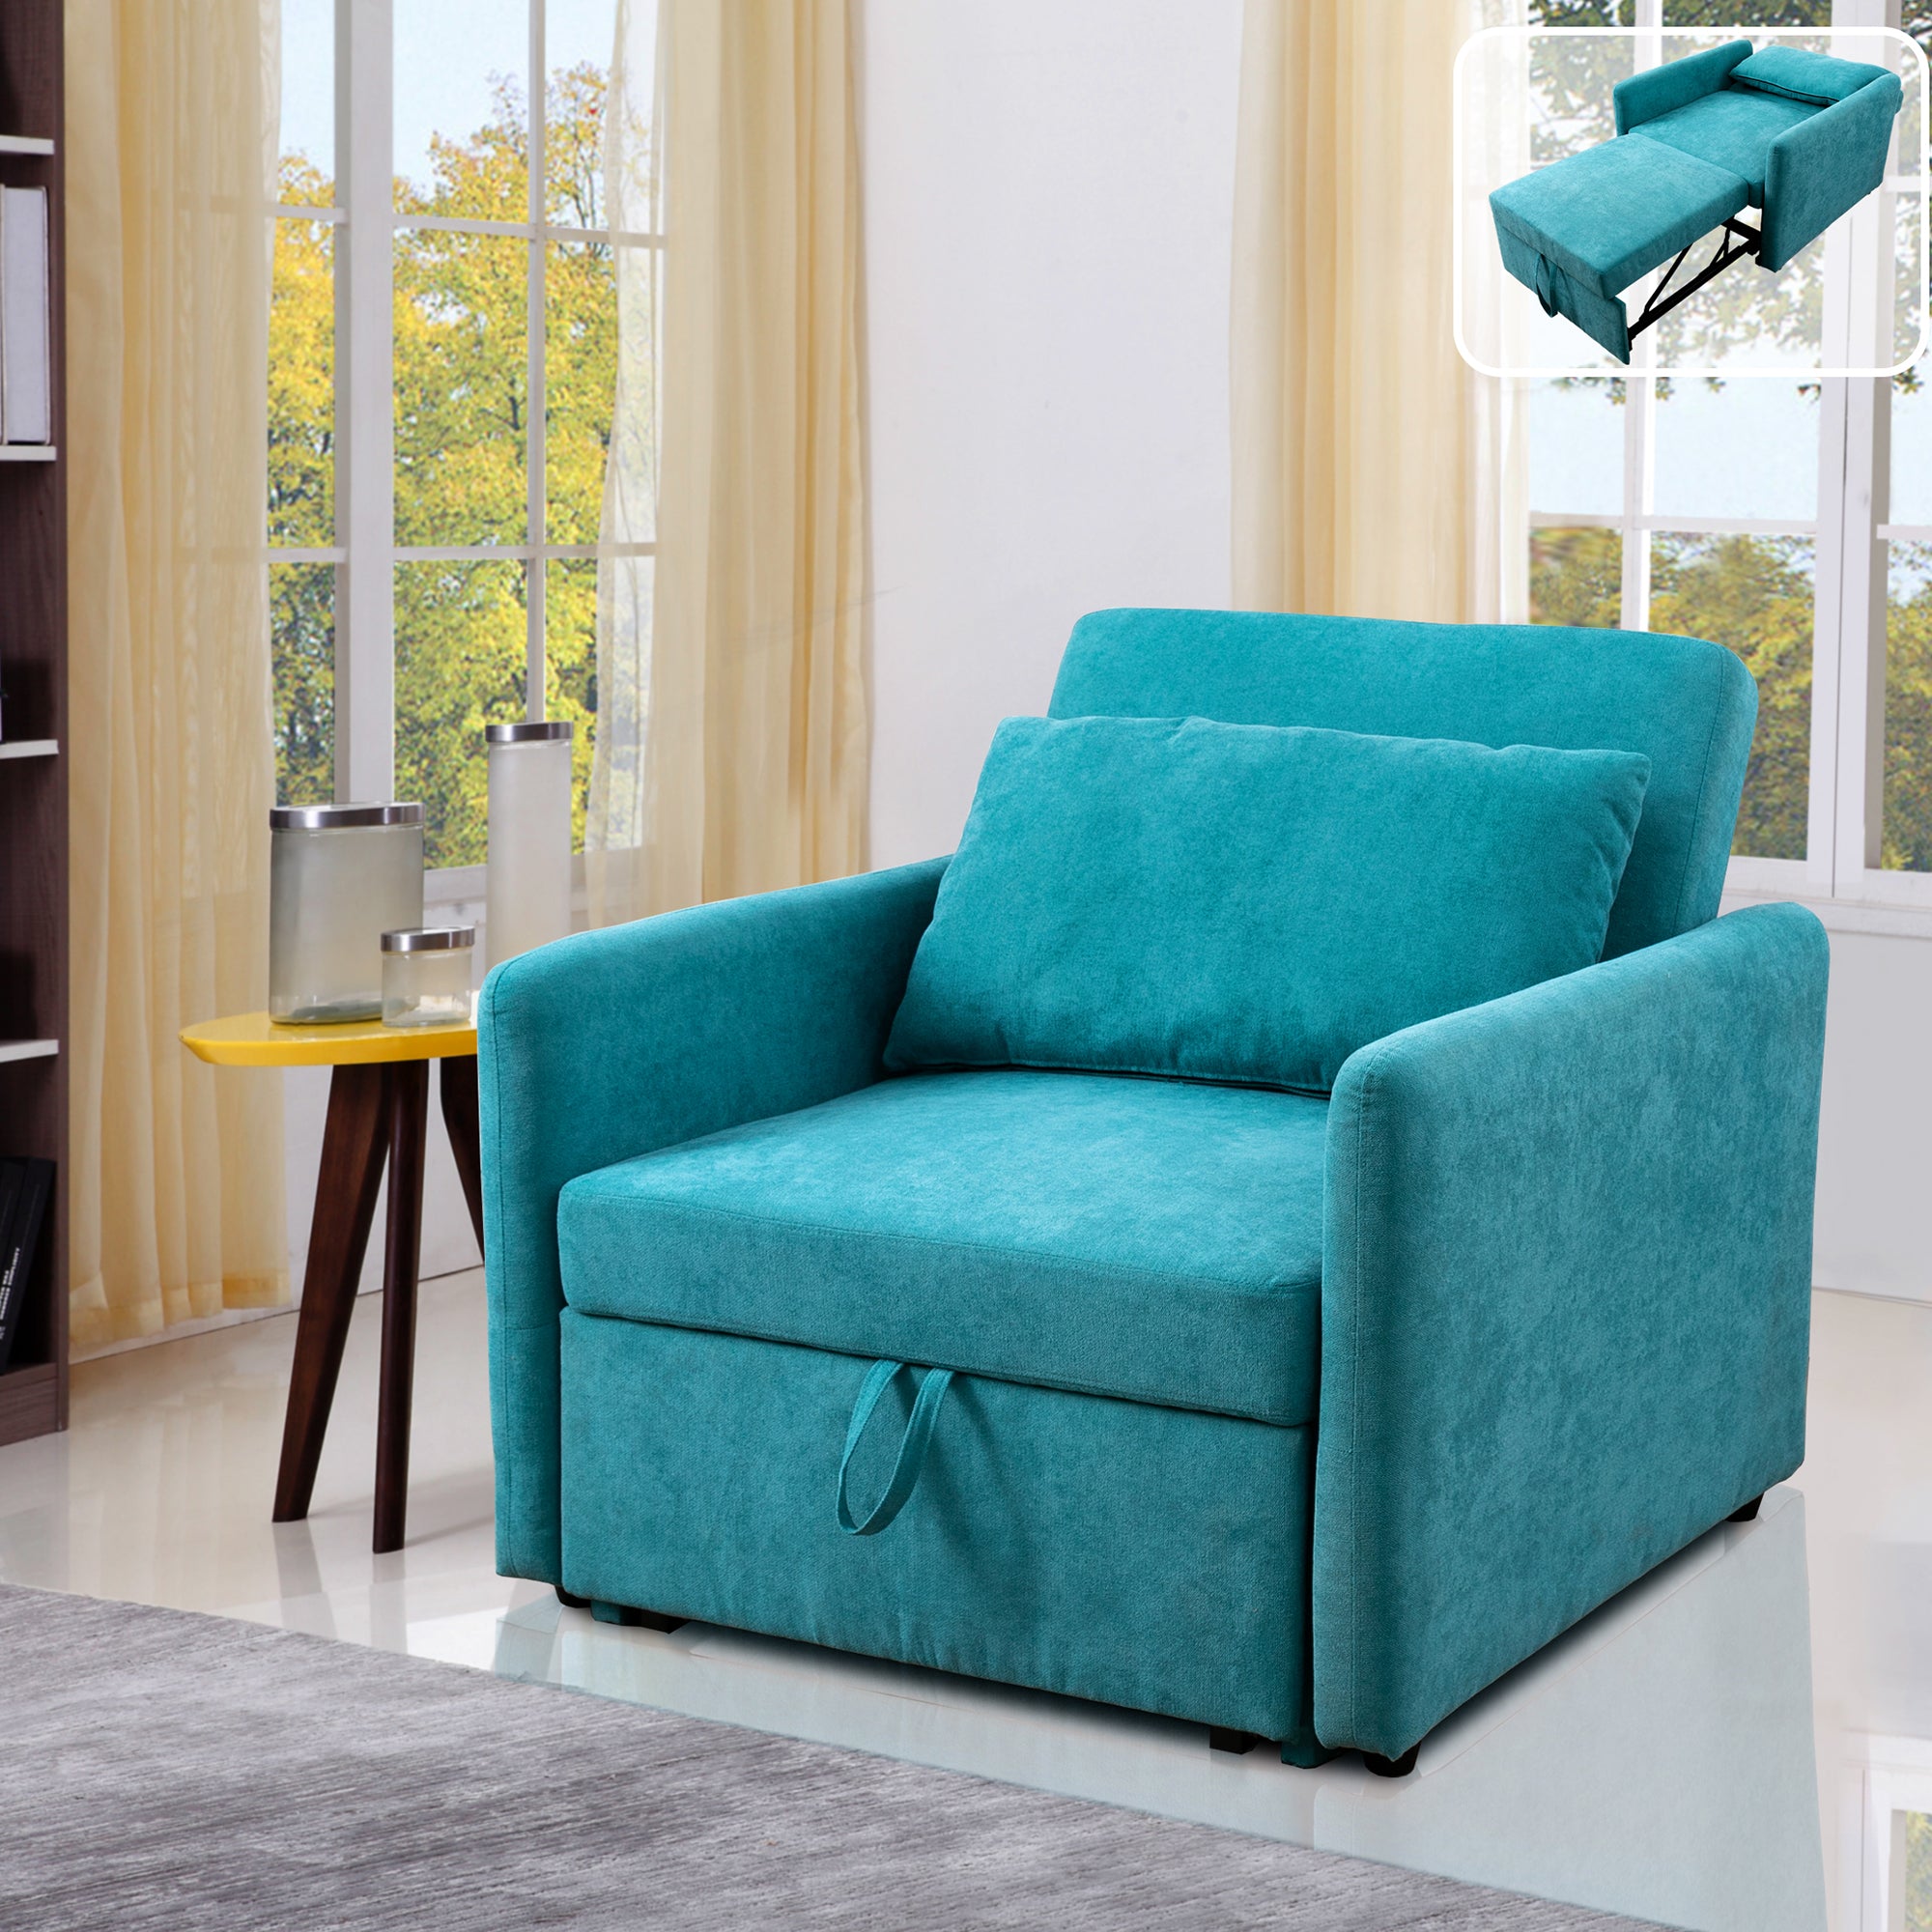 Ainehome Green Lint foldable Sofa bed